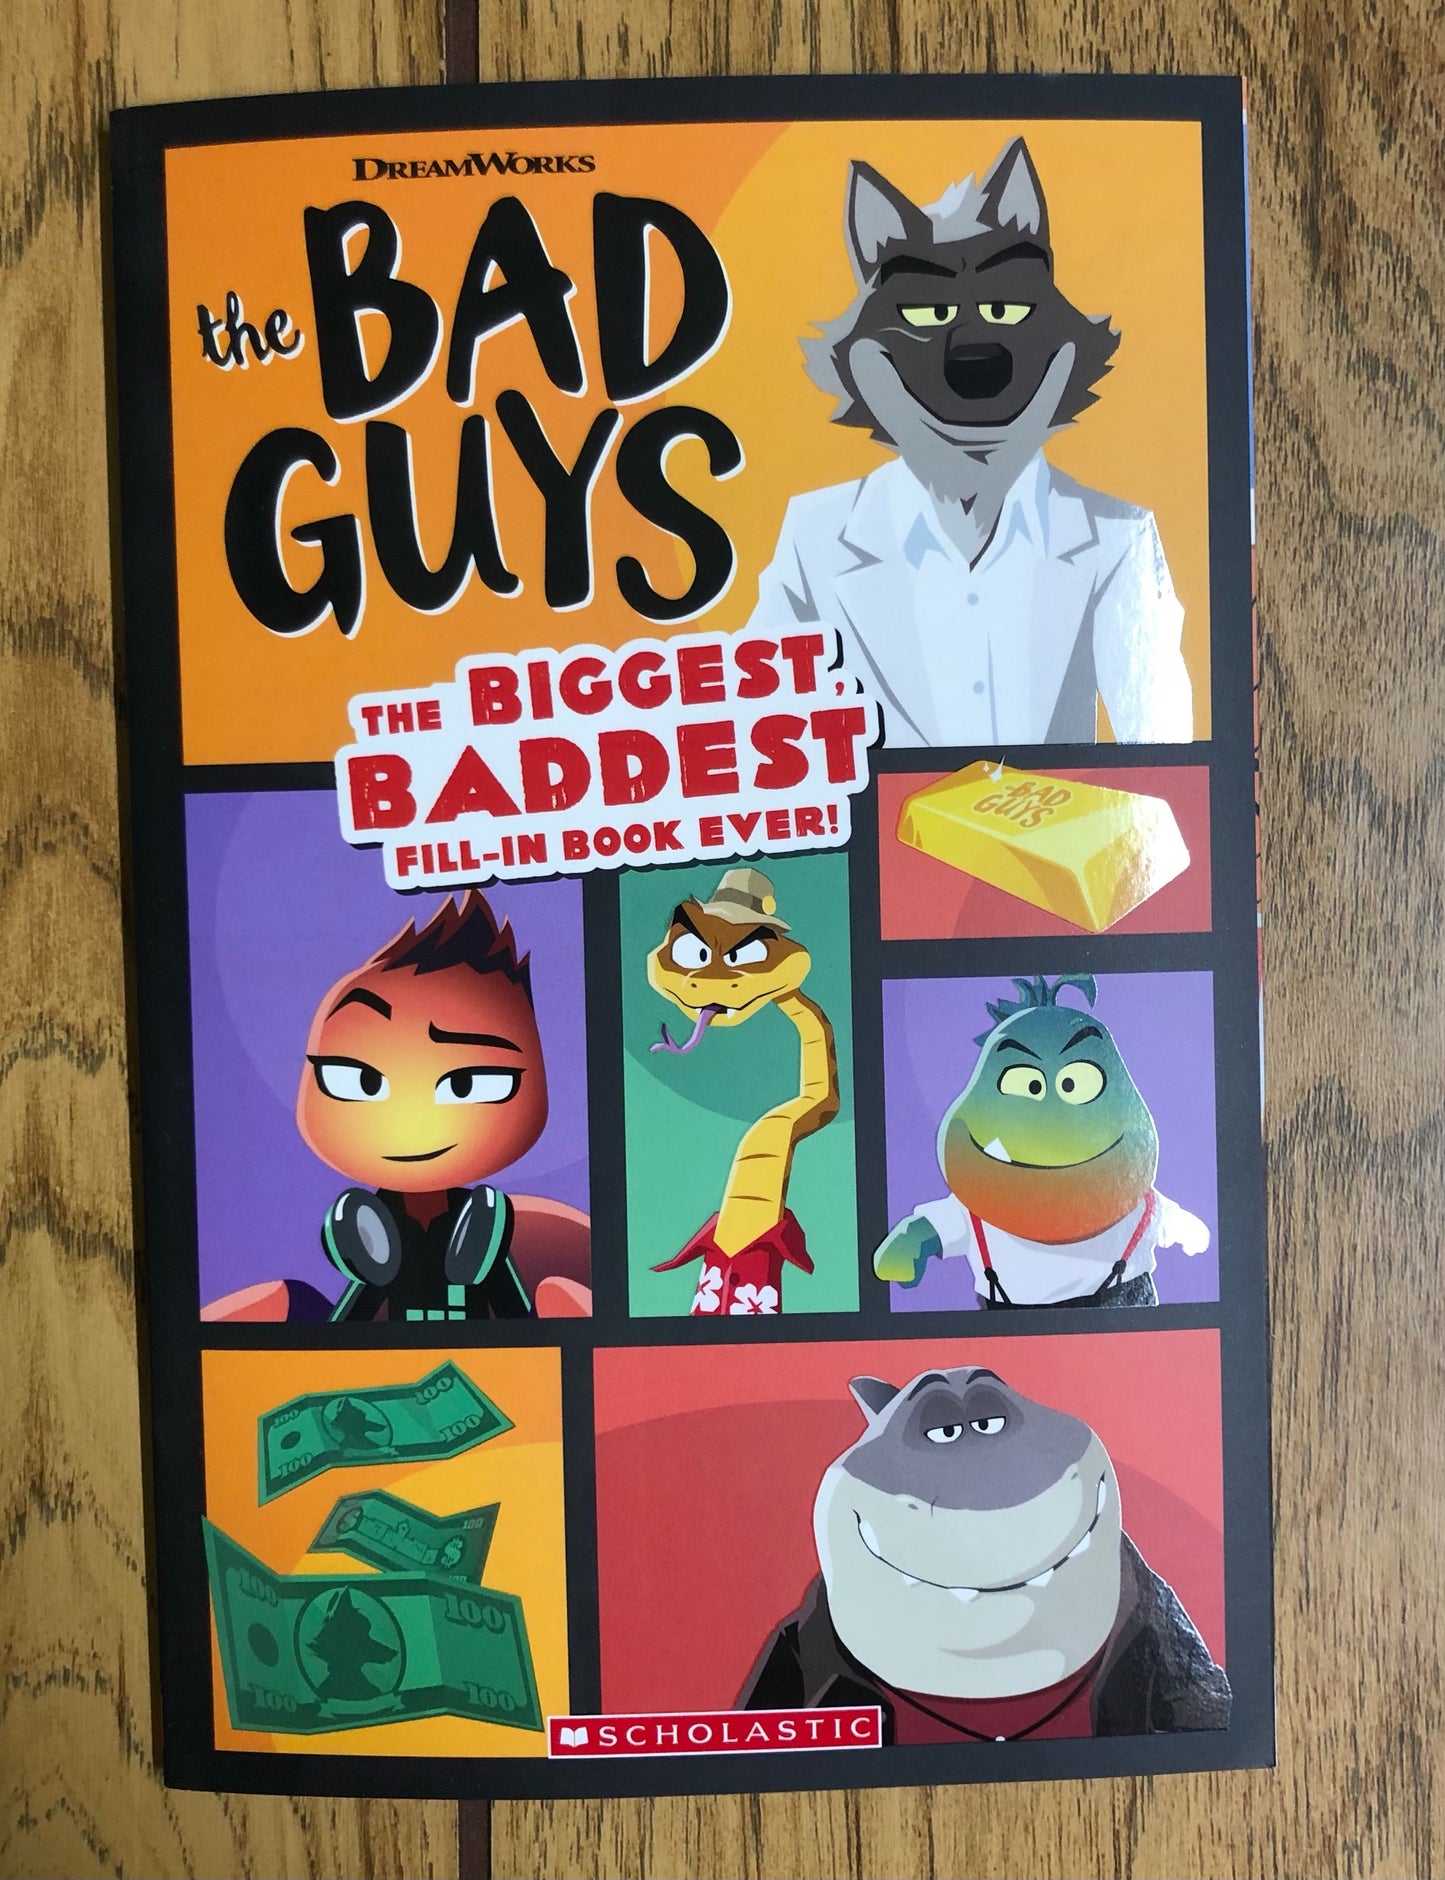 The Bad Guys: the Biggest, Baddest Fill-In Book Ever!